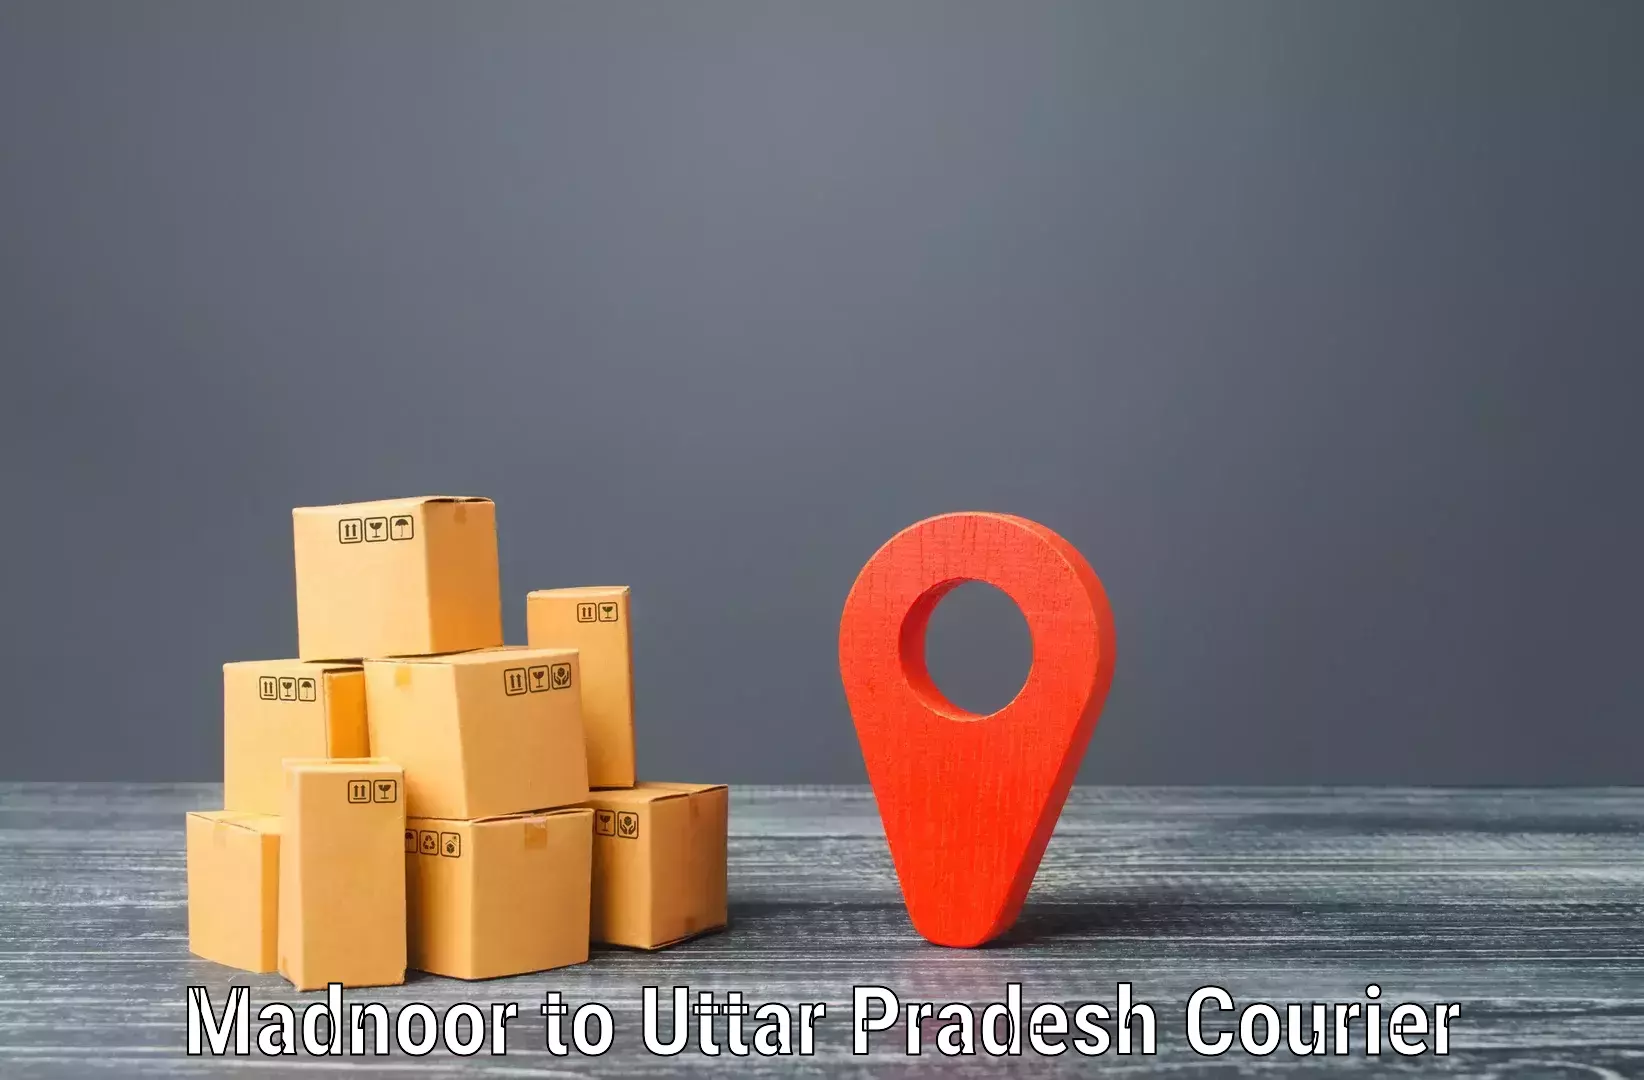 Cargo courier service Madnoor to Ayodhya